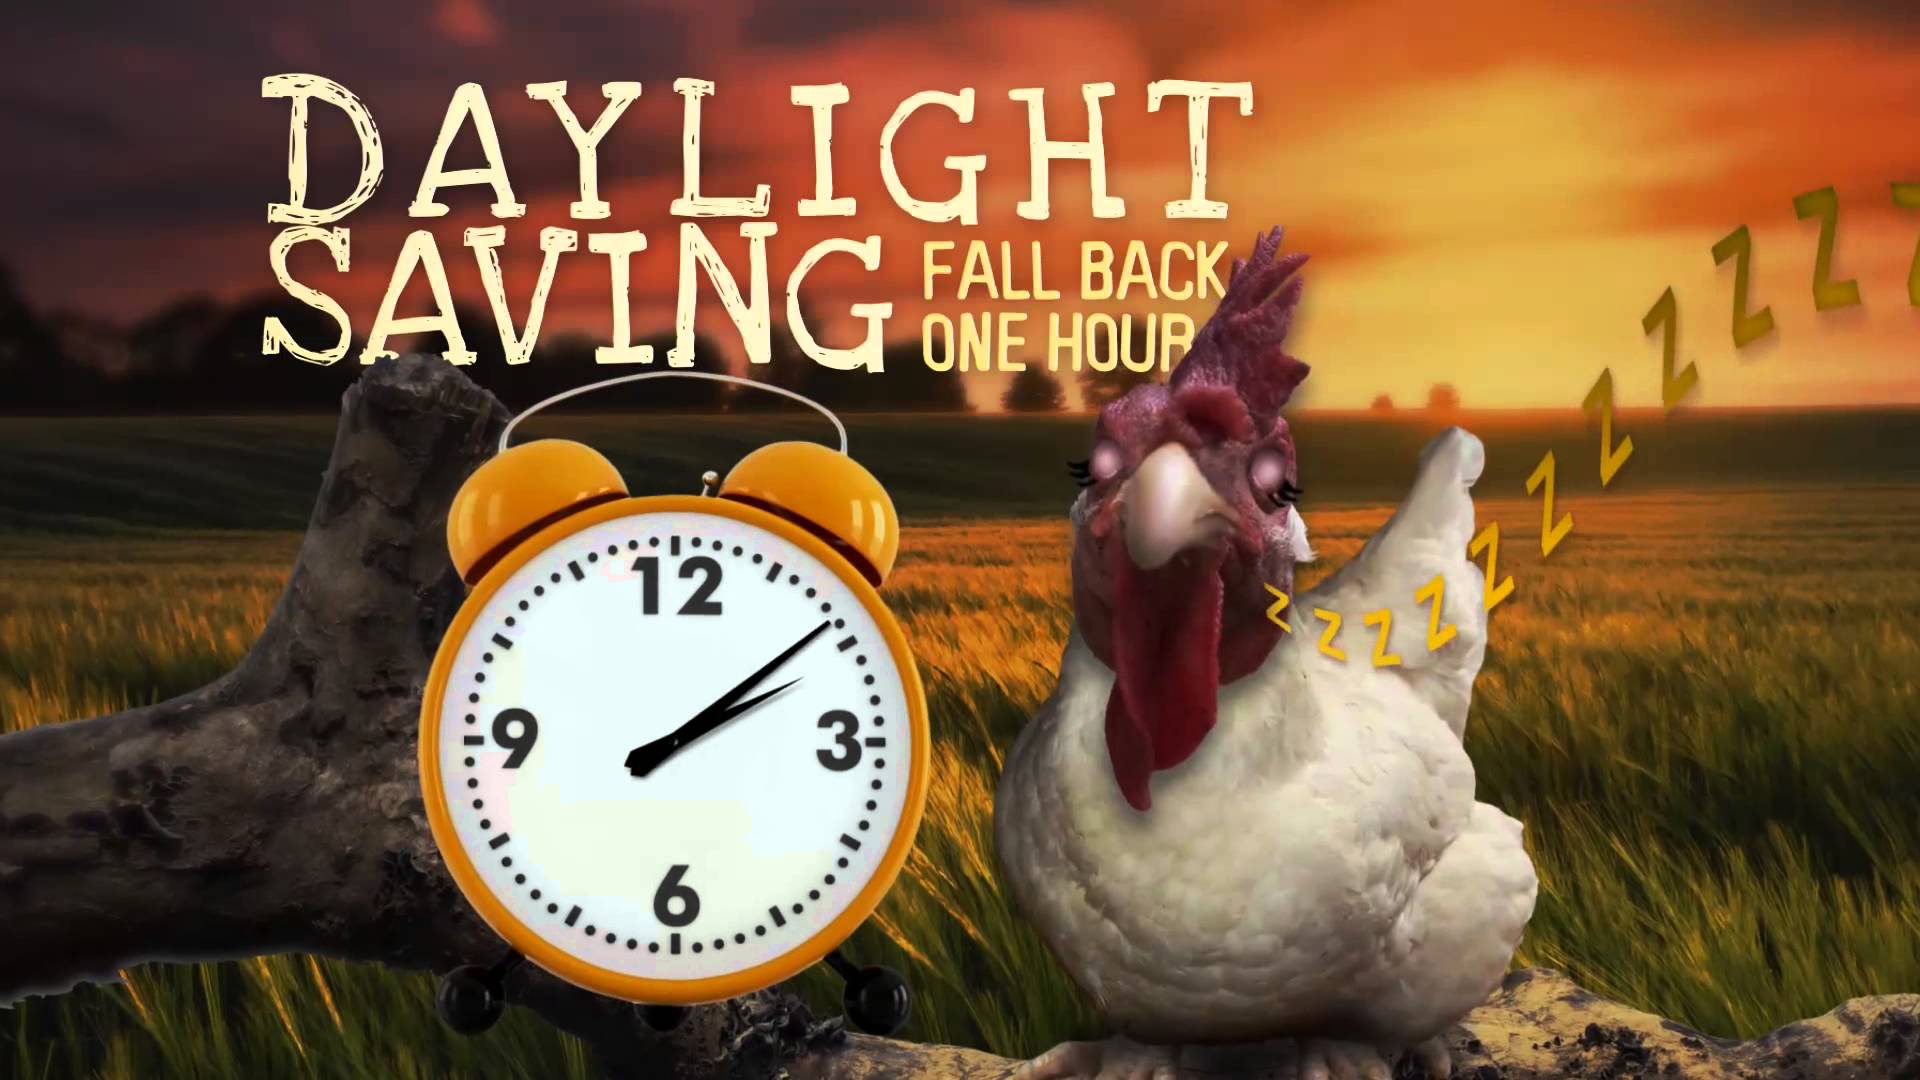 Daylight Saving Time End Will Add An Extra Hour To Your